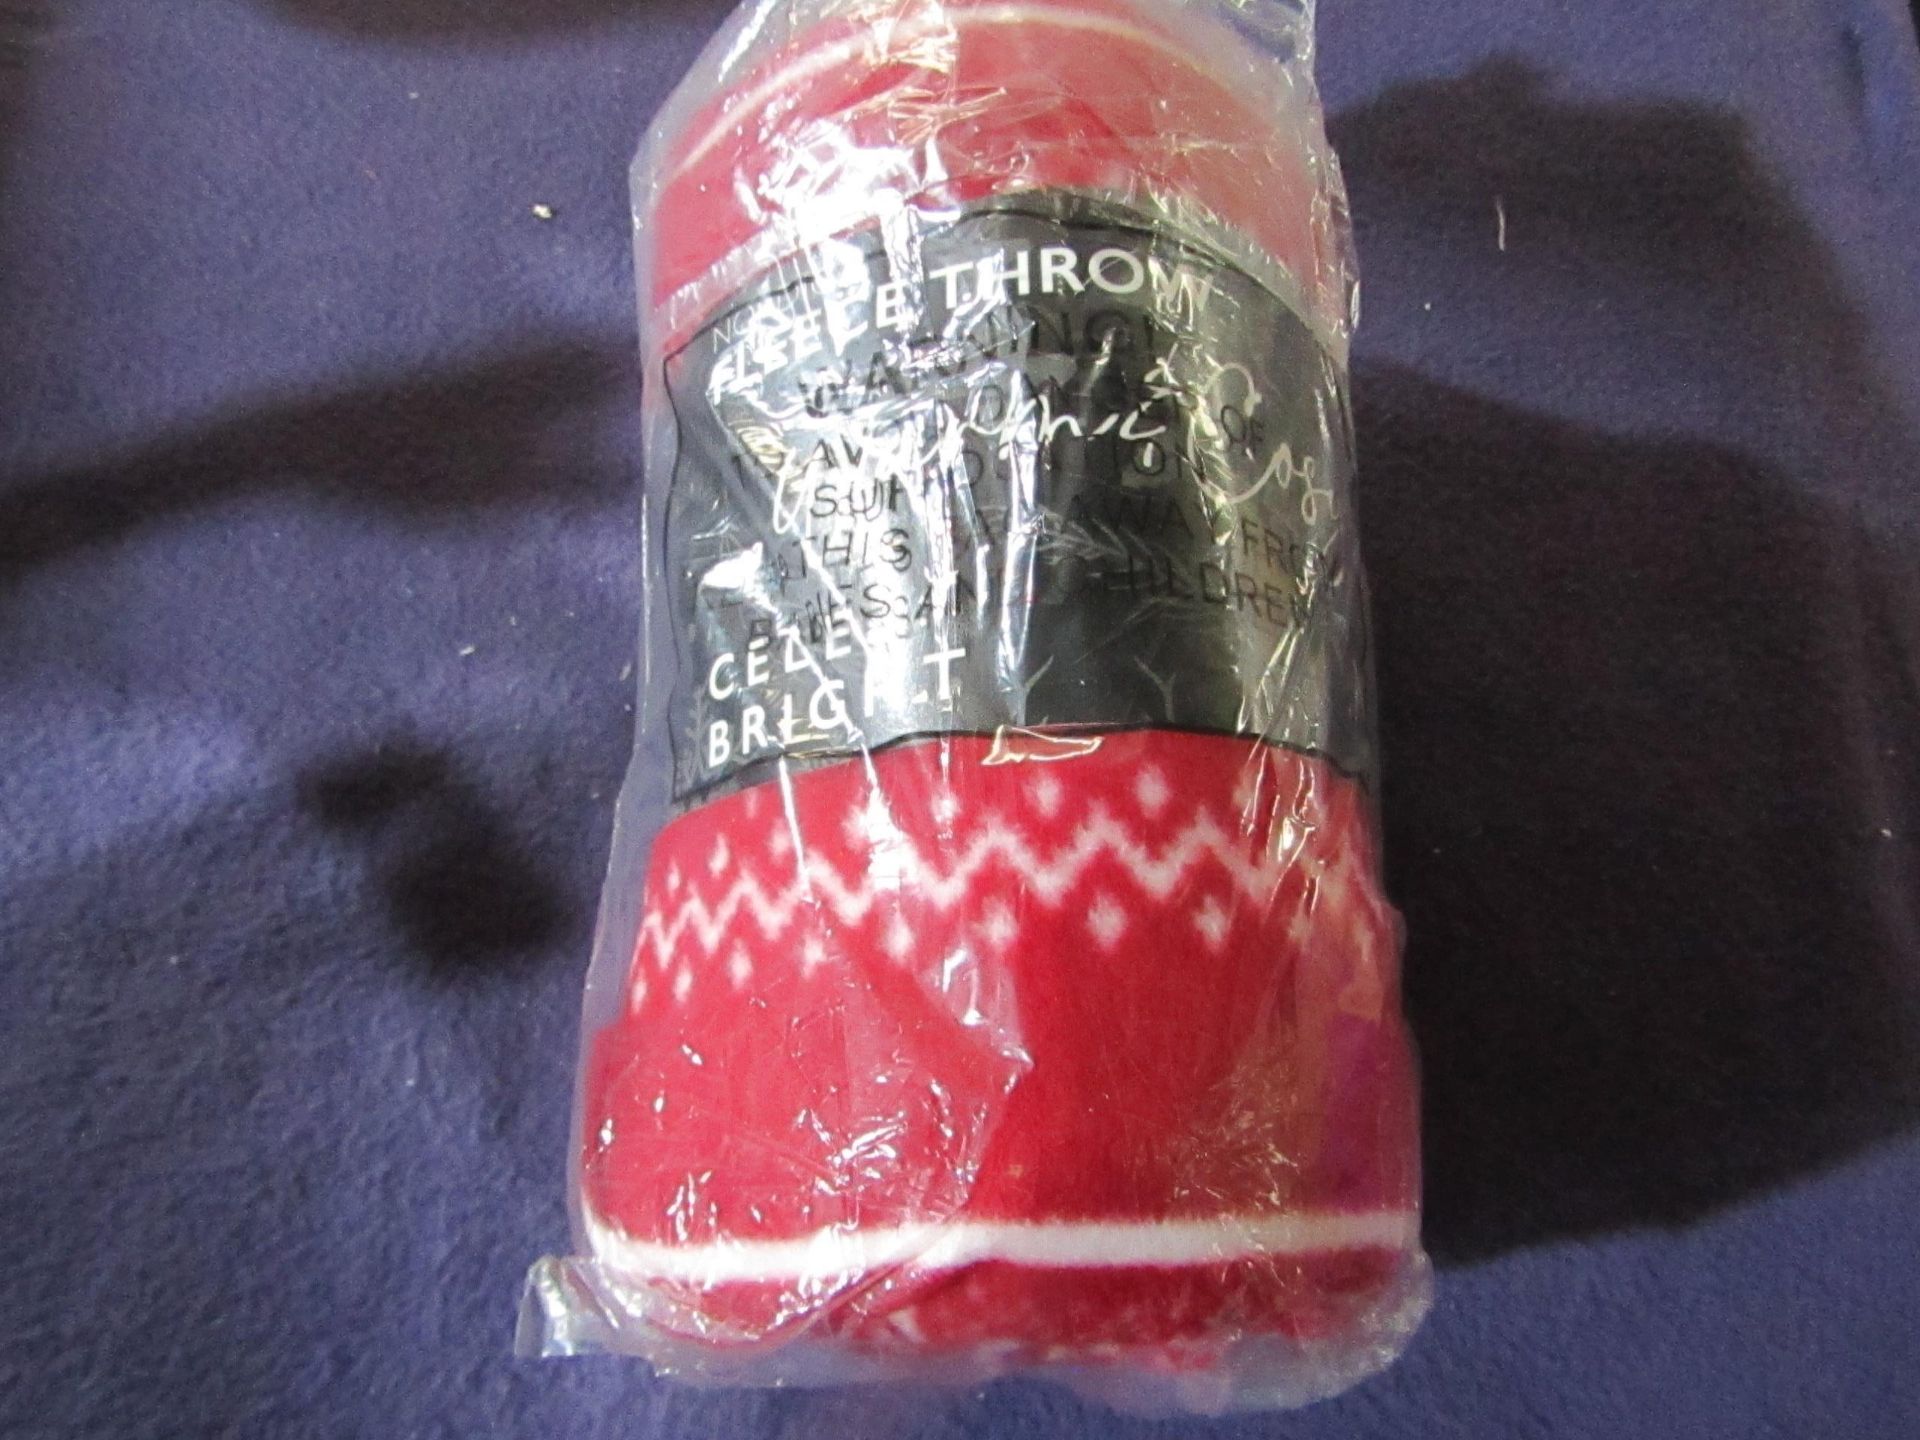 Celebright - Nordic Christmas Red Fleece Throw - Size Unknown - Good Condition & Packaged.